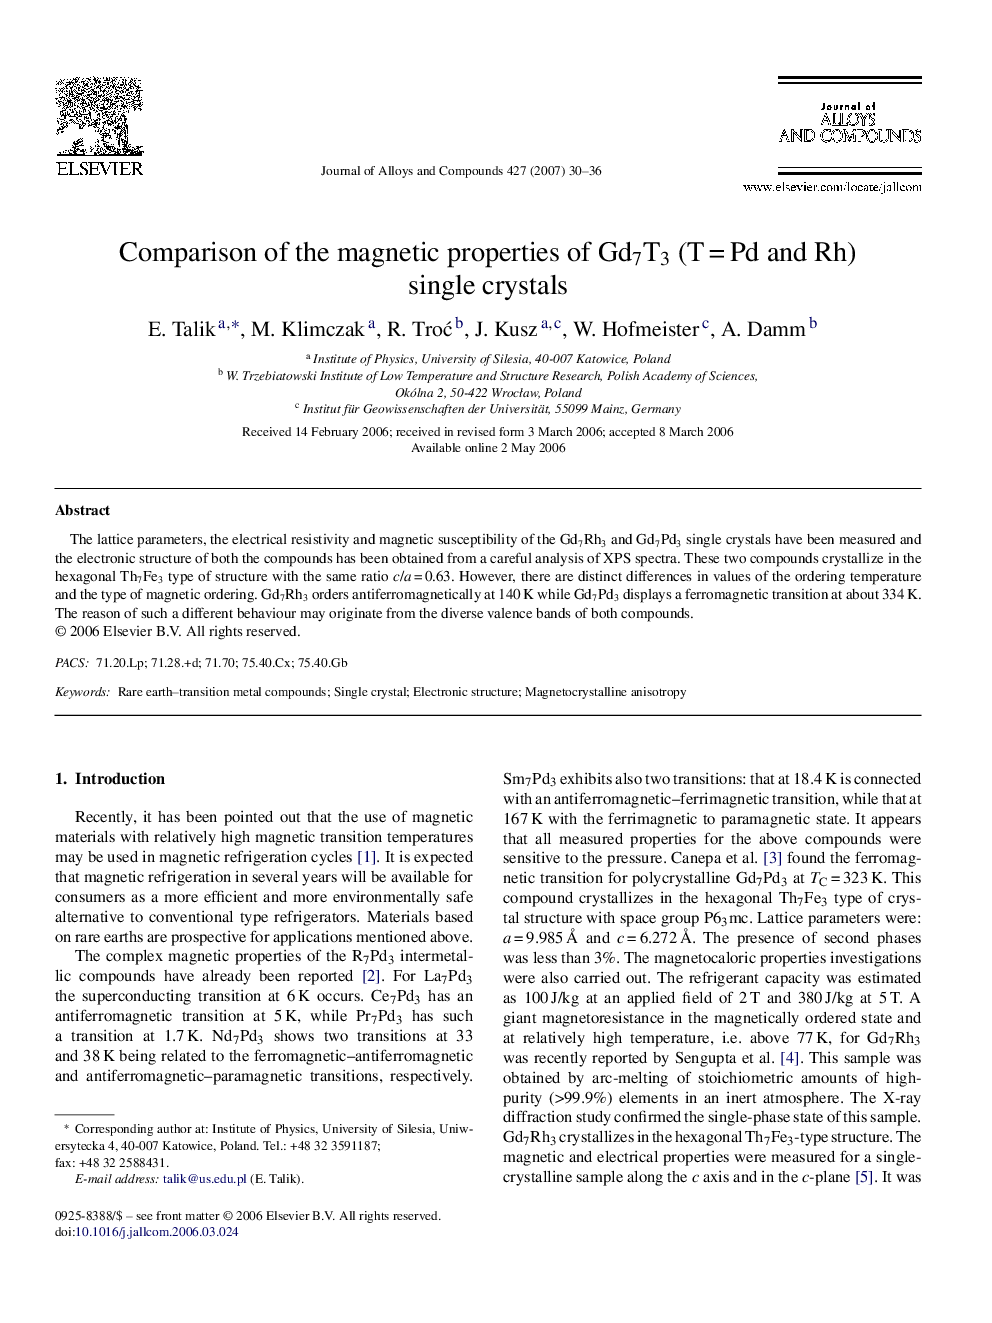 Comparison of the magnetic properties of Gd7T3 (TÂ =Â Pd and Rh) single crystals